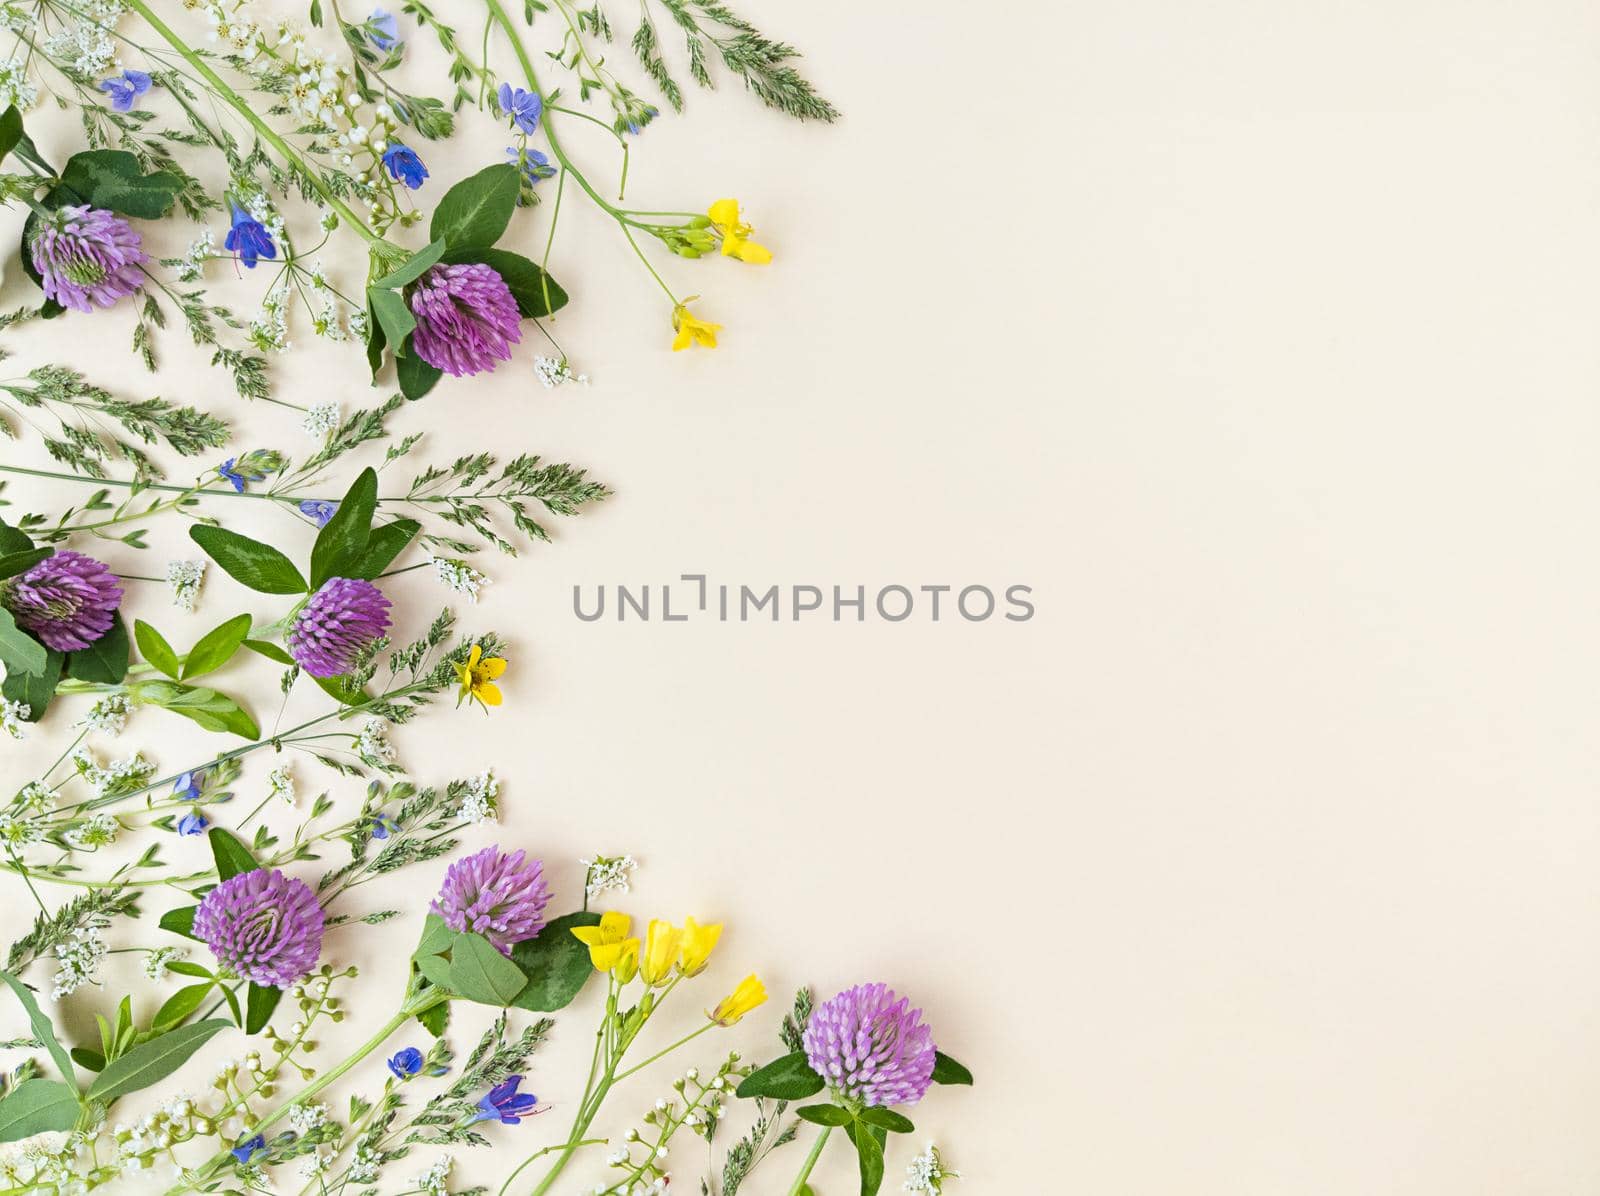 Mix of wildflowers on a beige background with copy space.